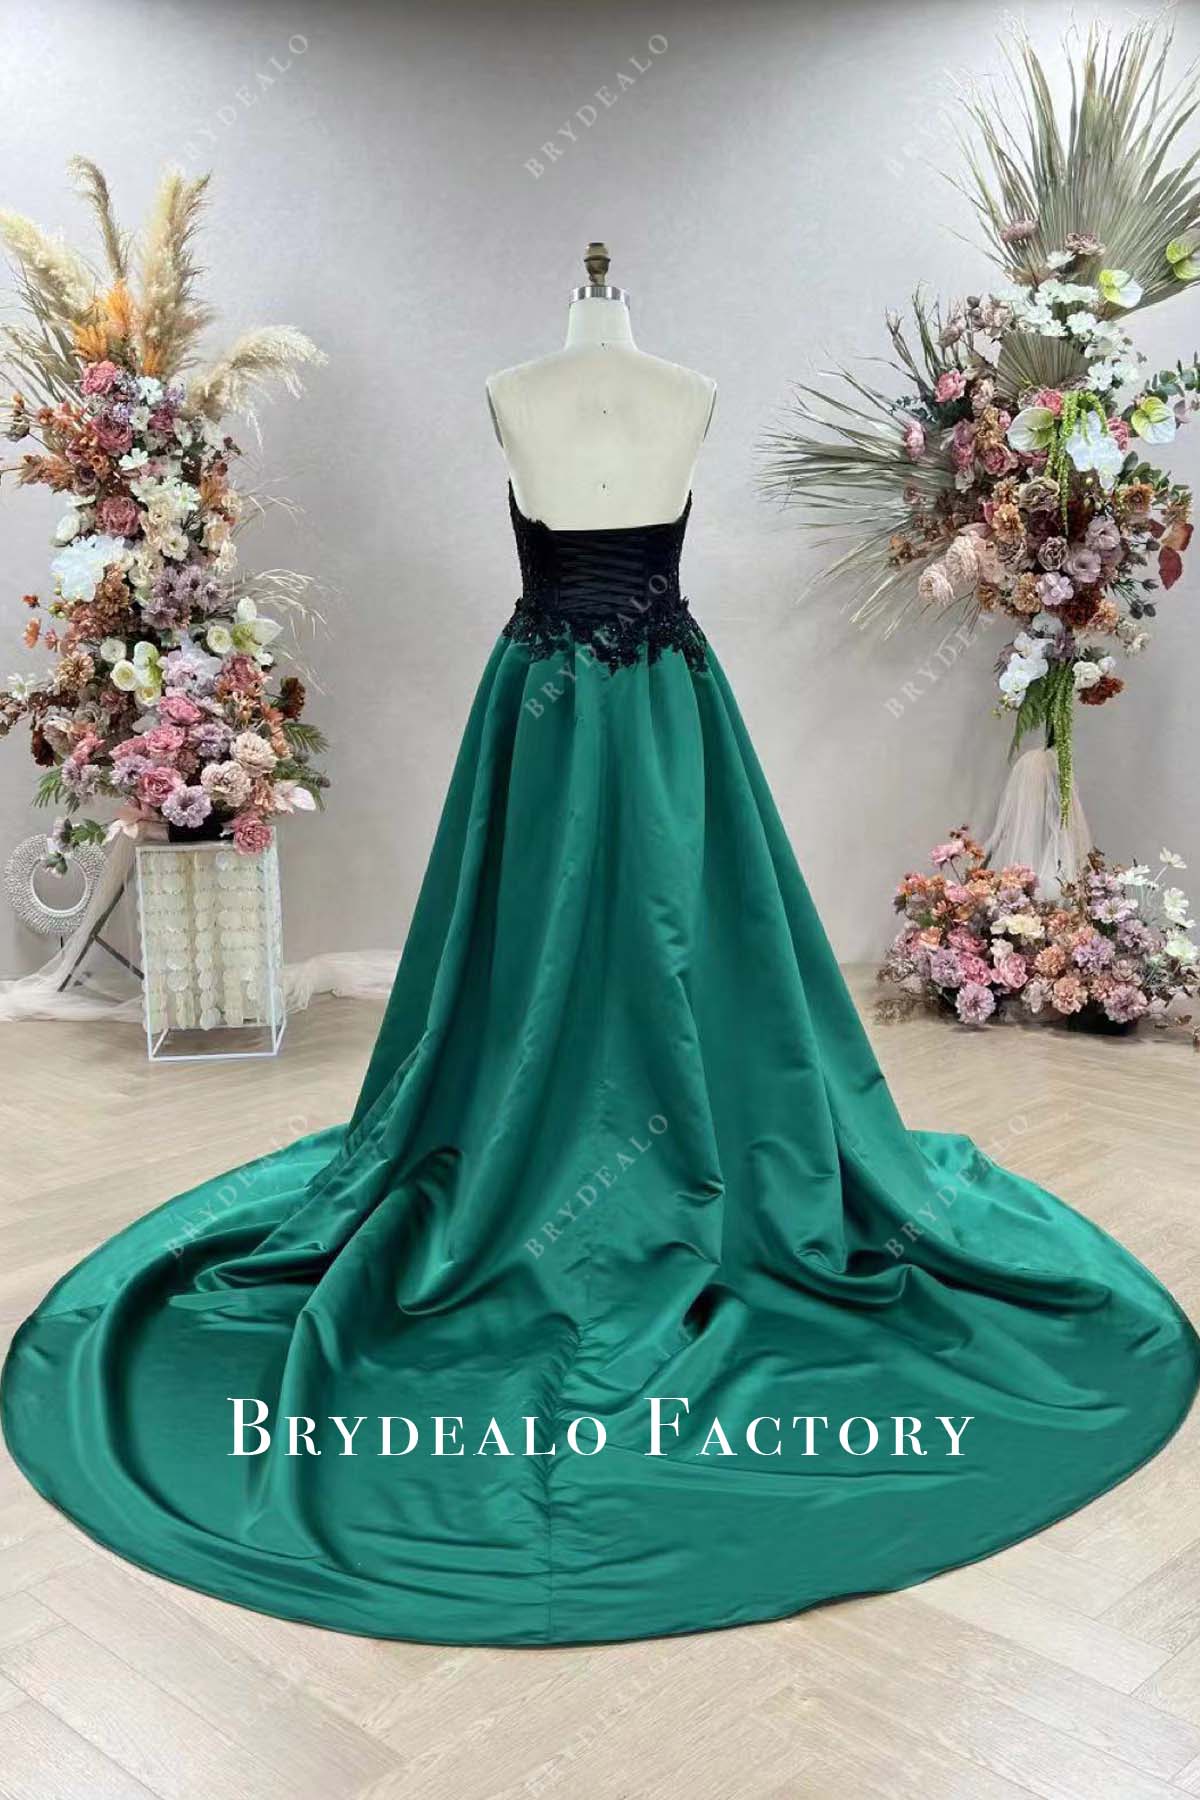 long train green ball gown strapless black wedding gown